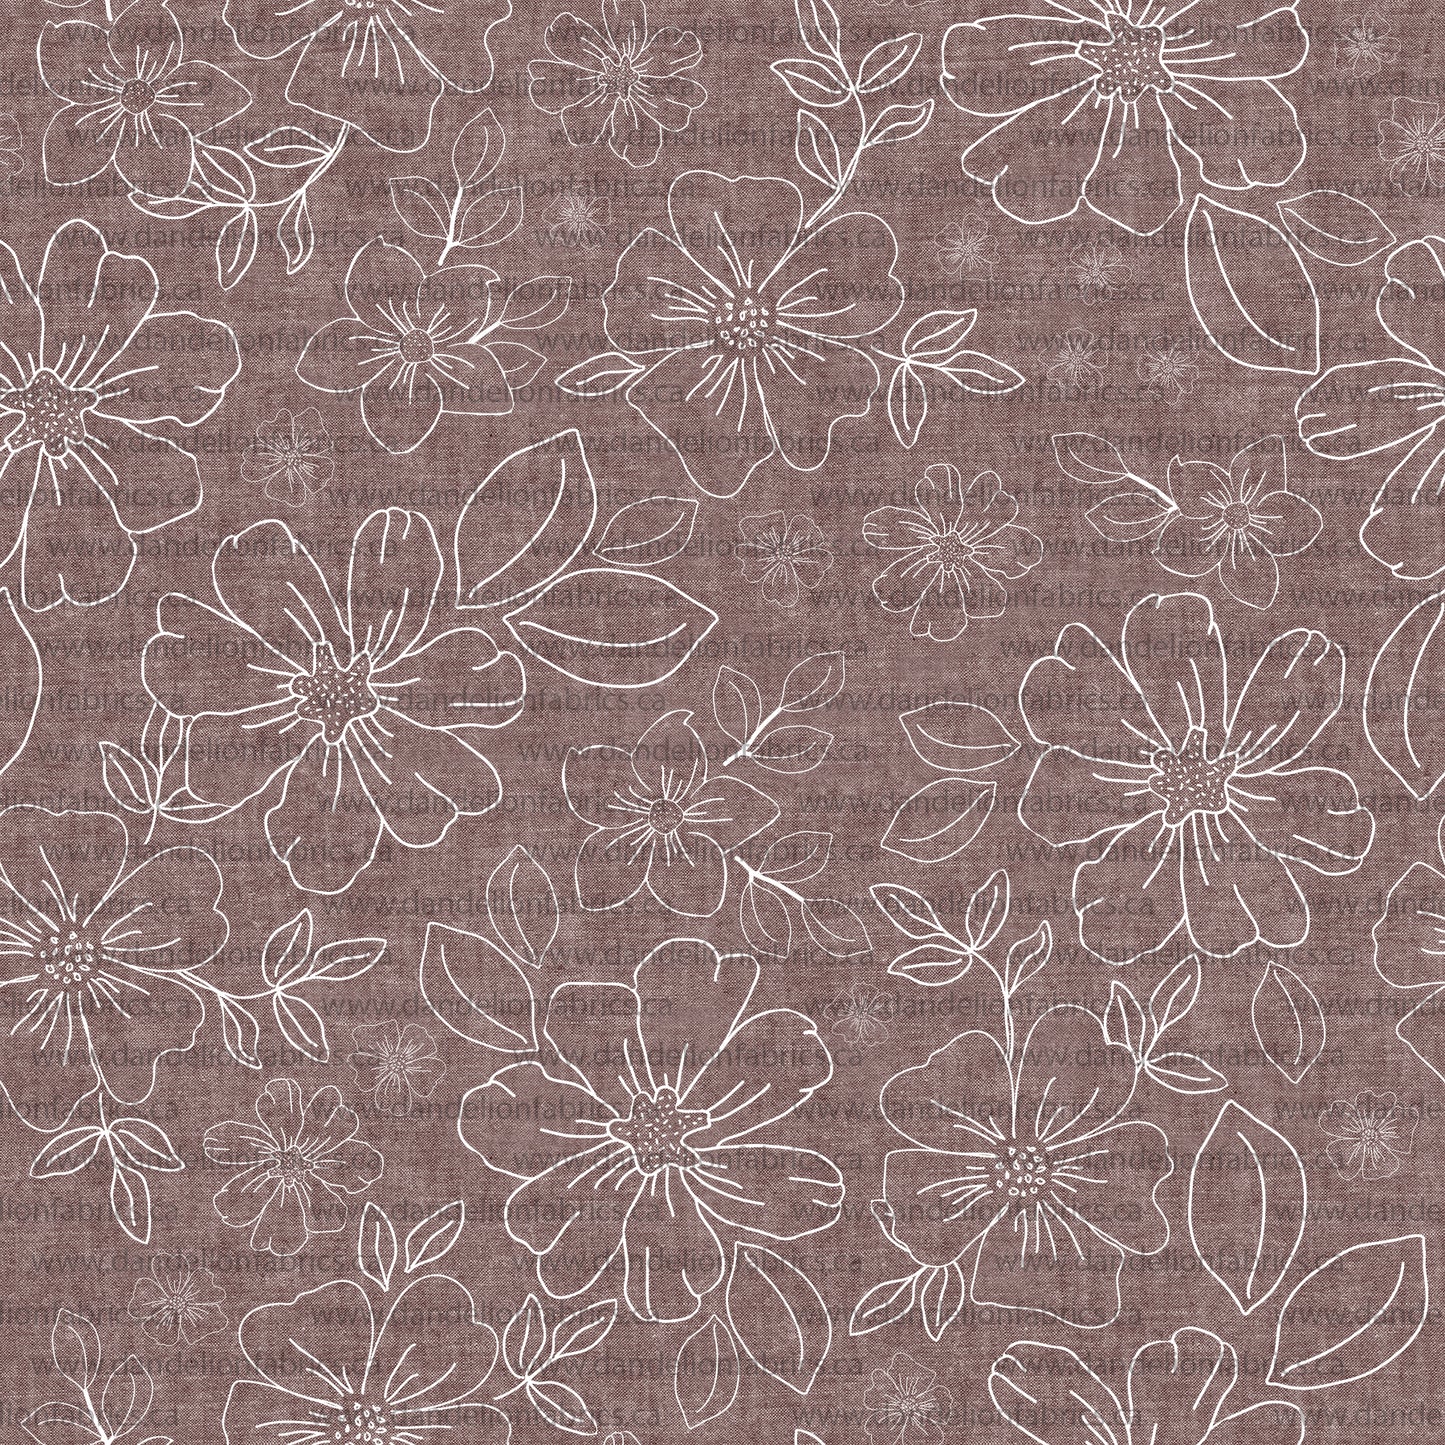 Serenity Floral in Antler | Unbrushed Rib Knit Fabric | SOLD BY THE FULL BOLT